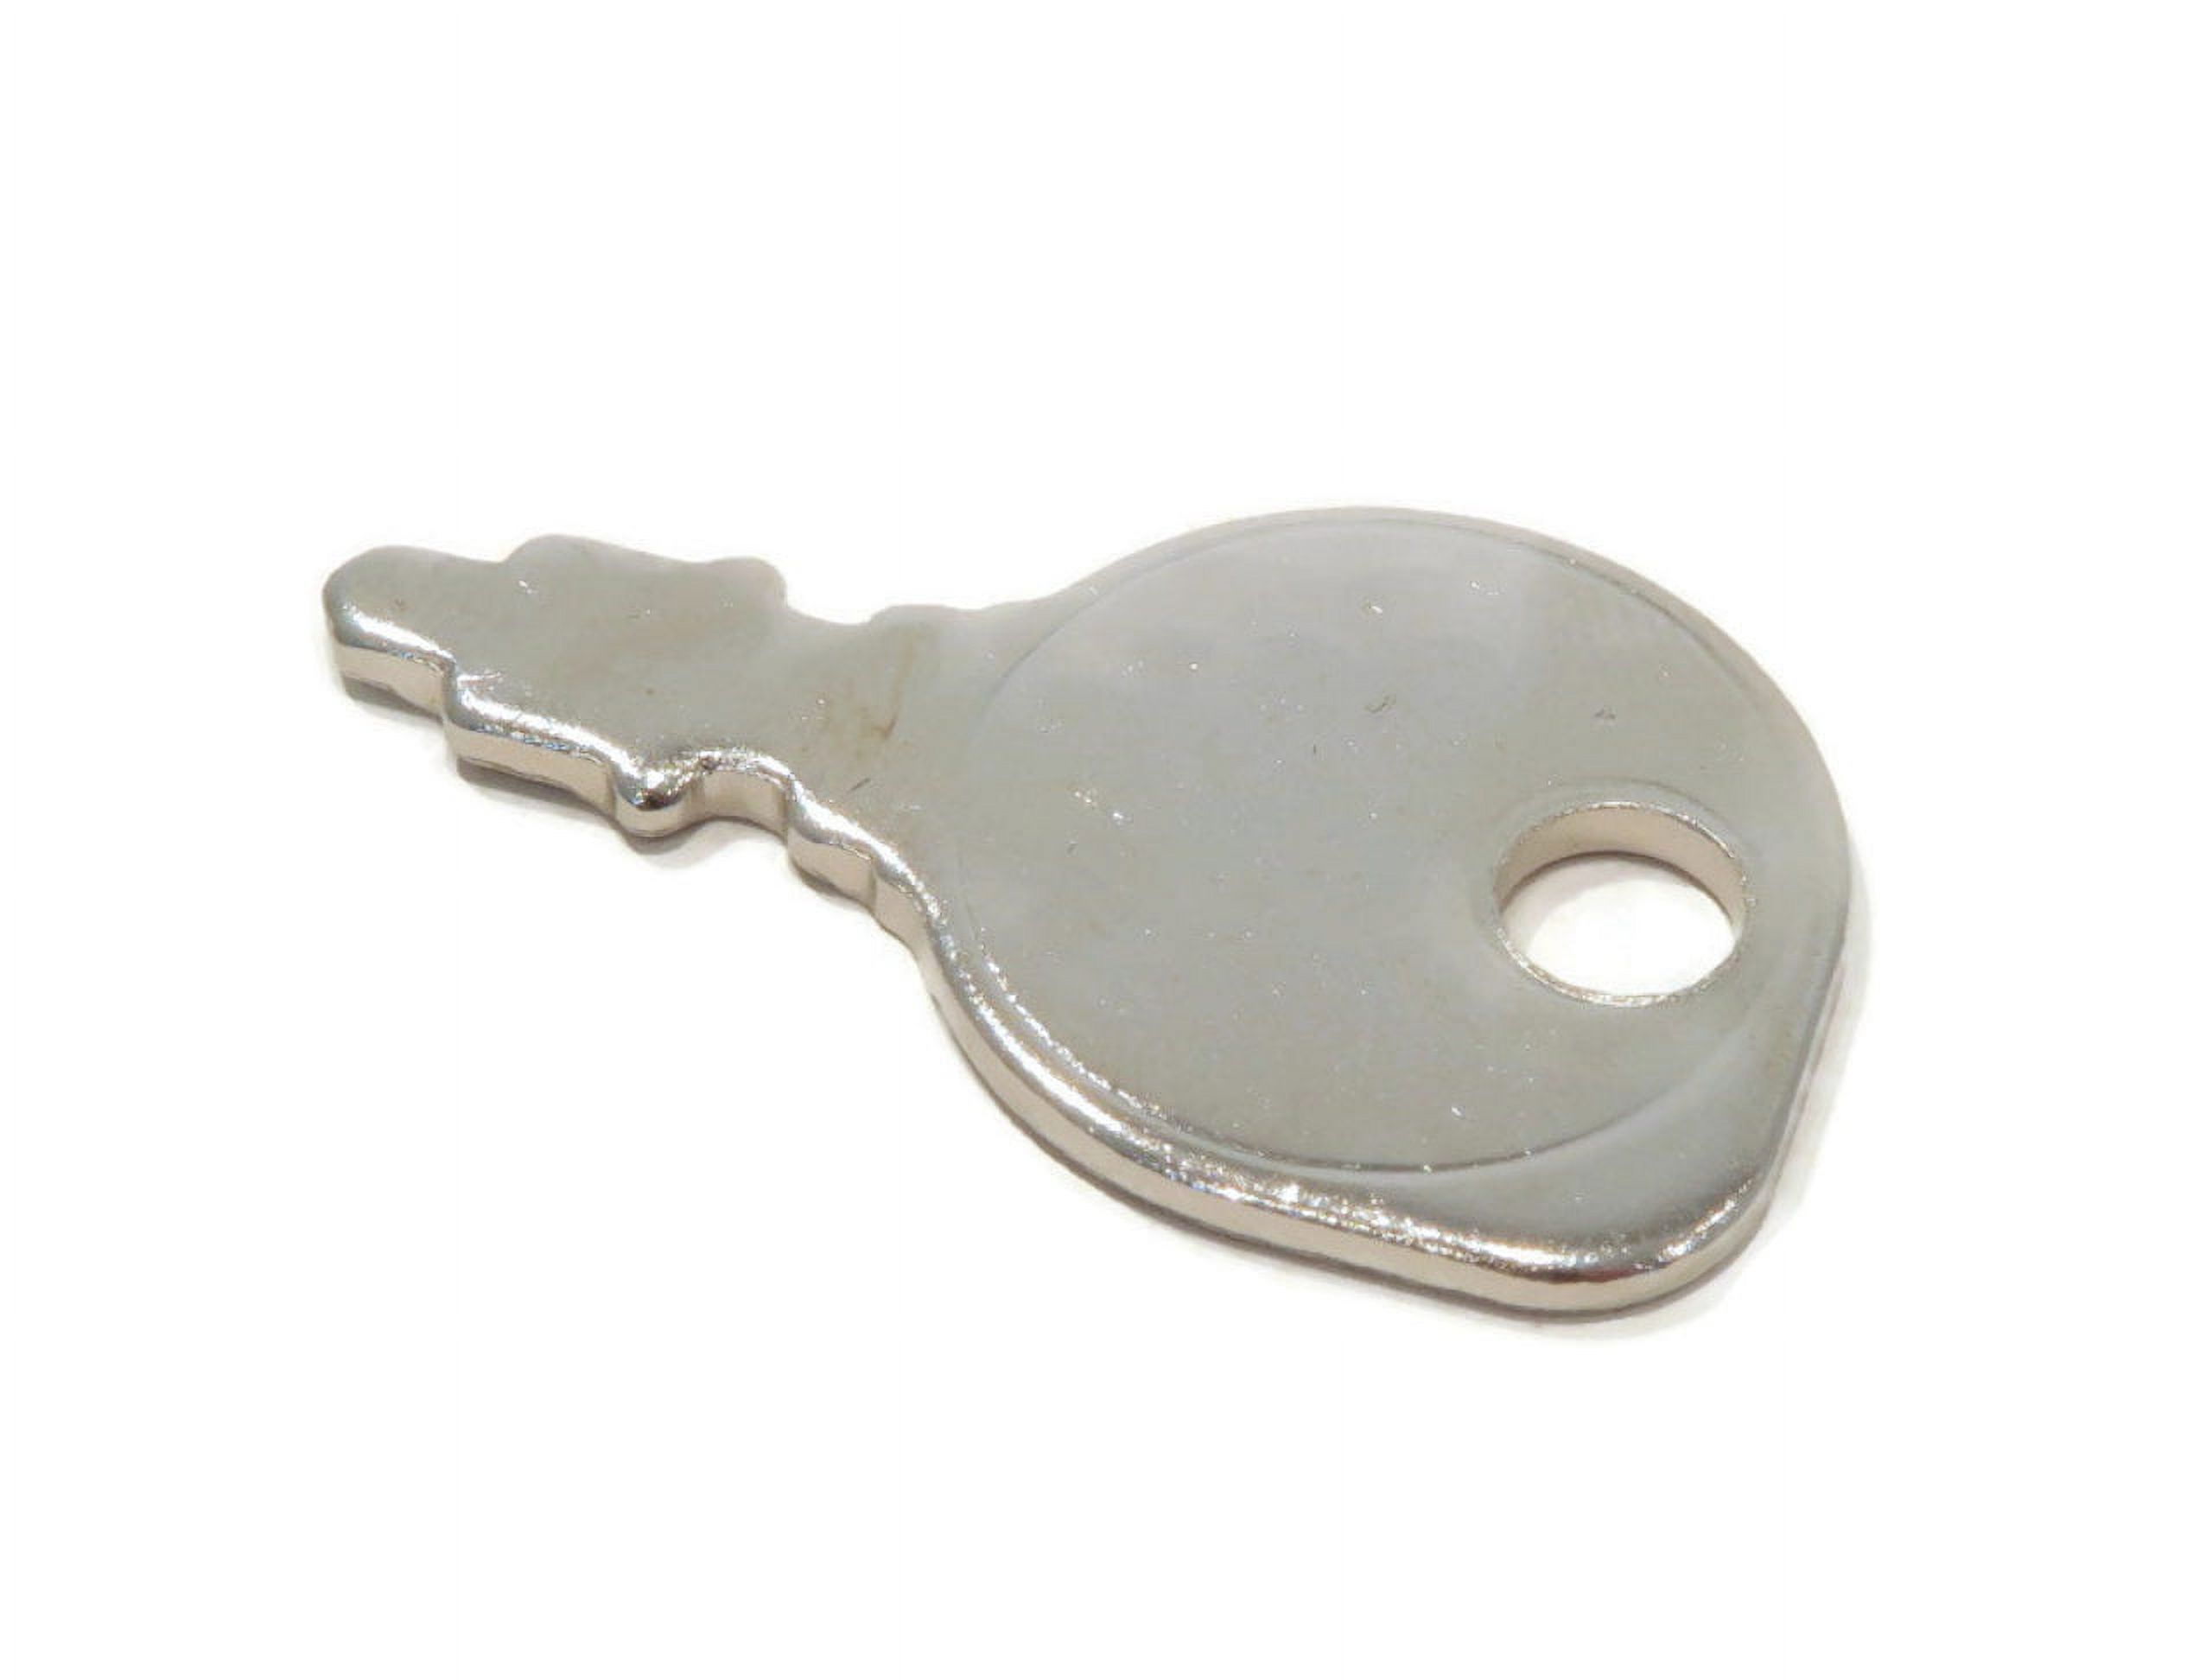 The ROP Shop | Starter Key For Briggs & Stratton 422707-1510-01, 422707-1511-01, 422707-1512-01 - image 5 of 5